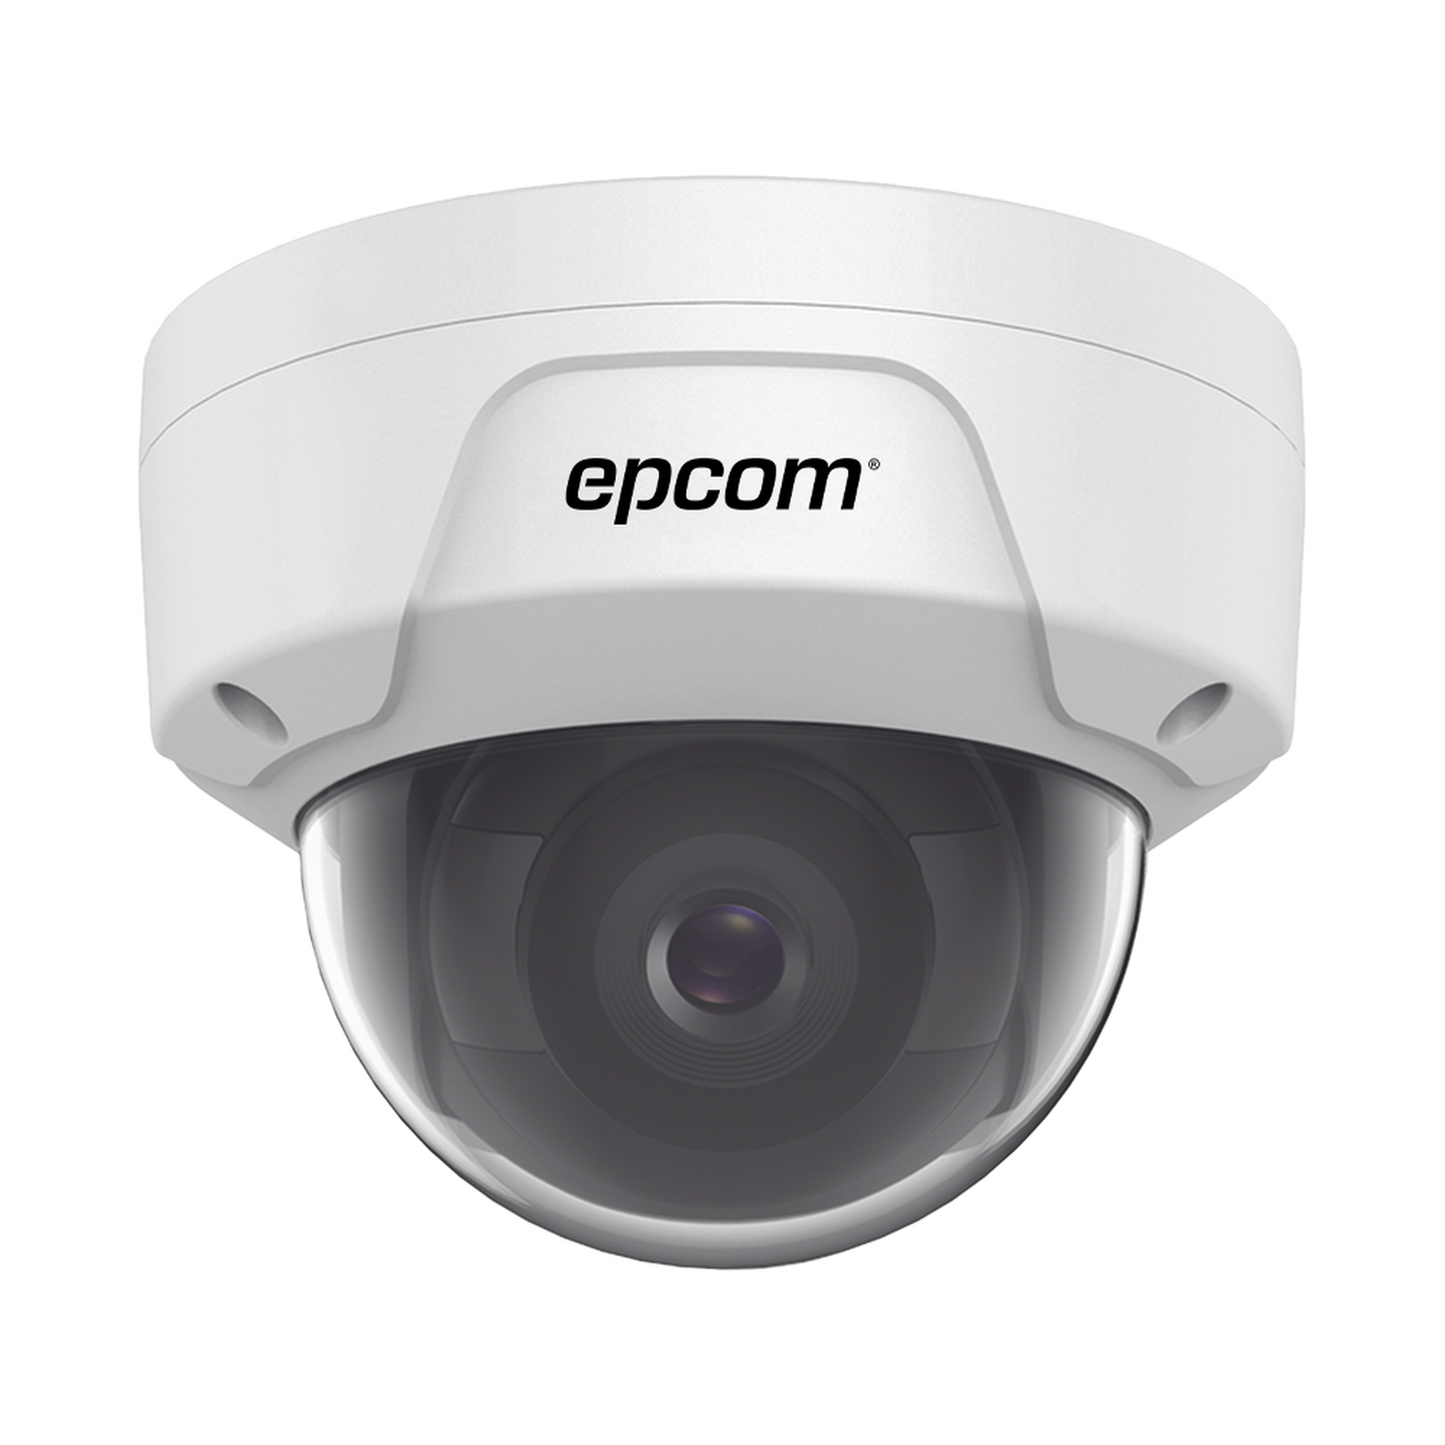 IP Dome 4 MP / Performance Series / 2.8mm Lens / H.265 / IP67 / POE / 98ft IR / WDR 120dB / P2P Compatible / Polycarbonate & Metal Housing